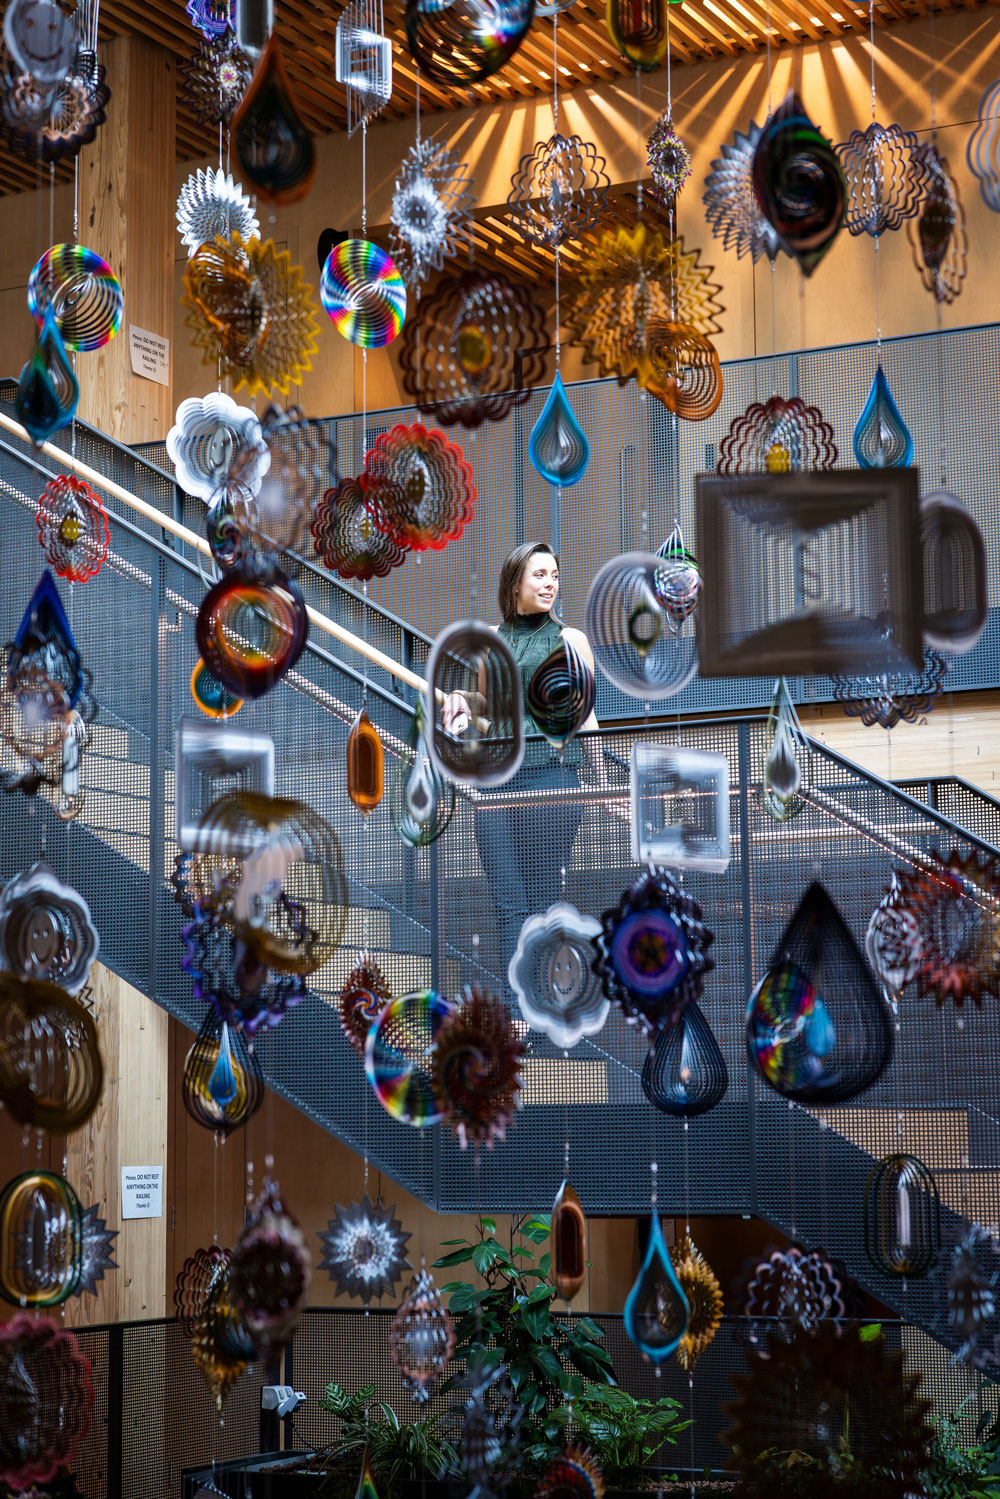 Nick Cave Spinner Forest Installation - Sydney - architecture